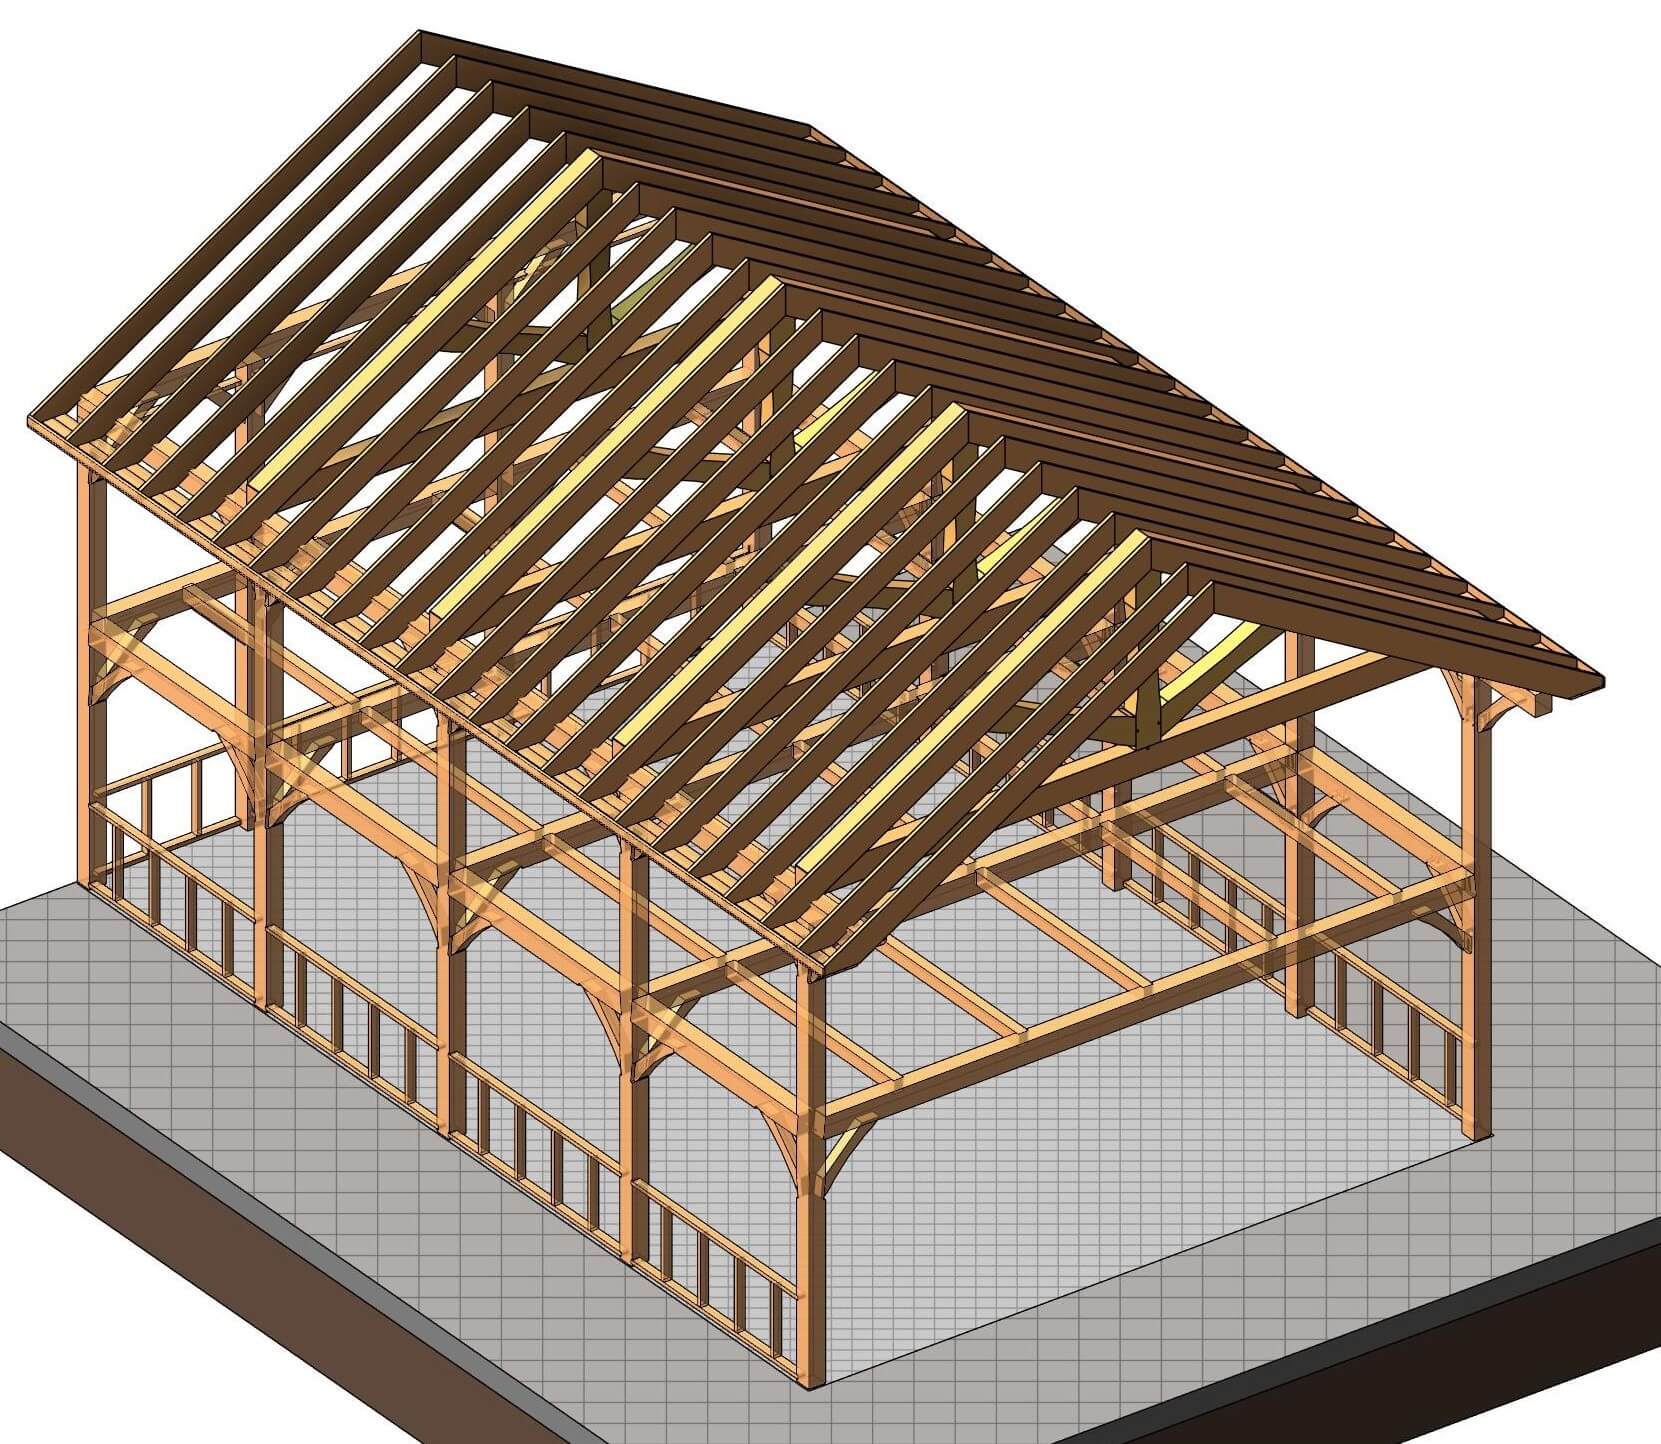 Heavy timber framed structure